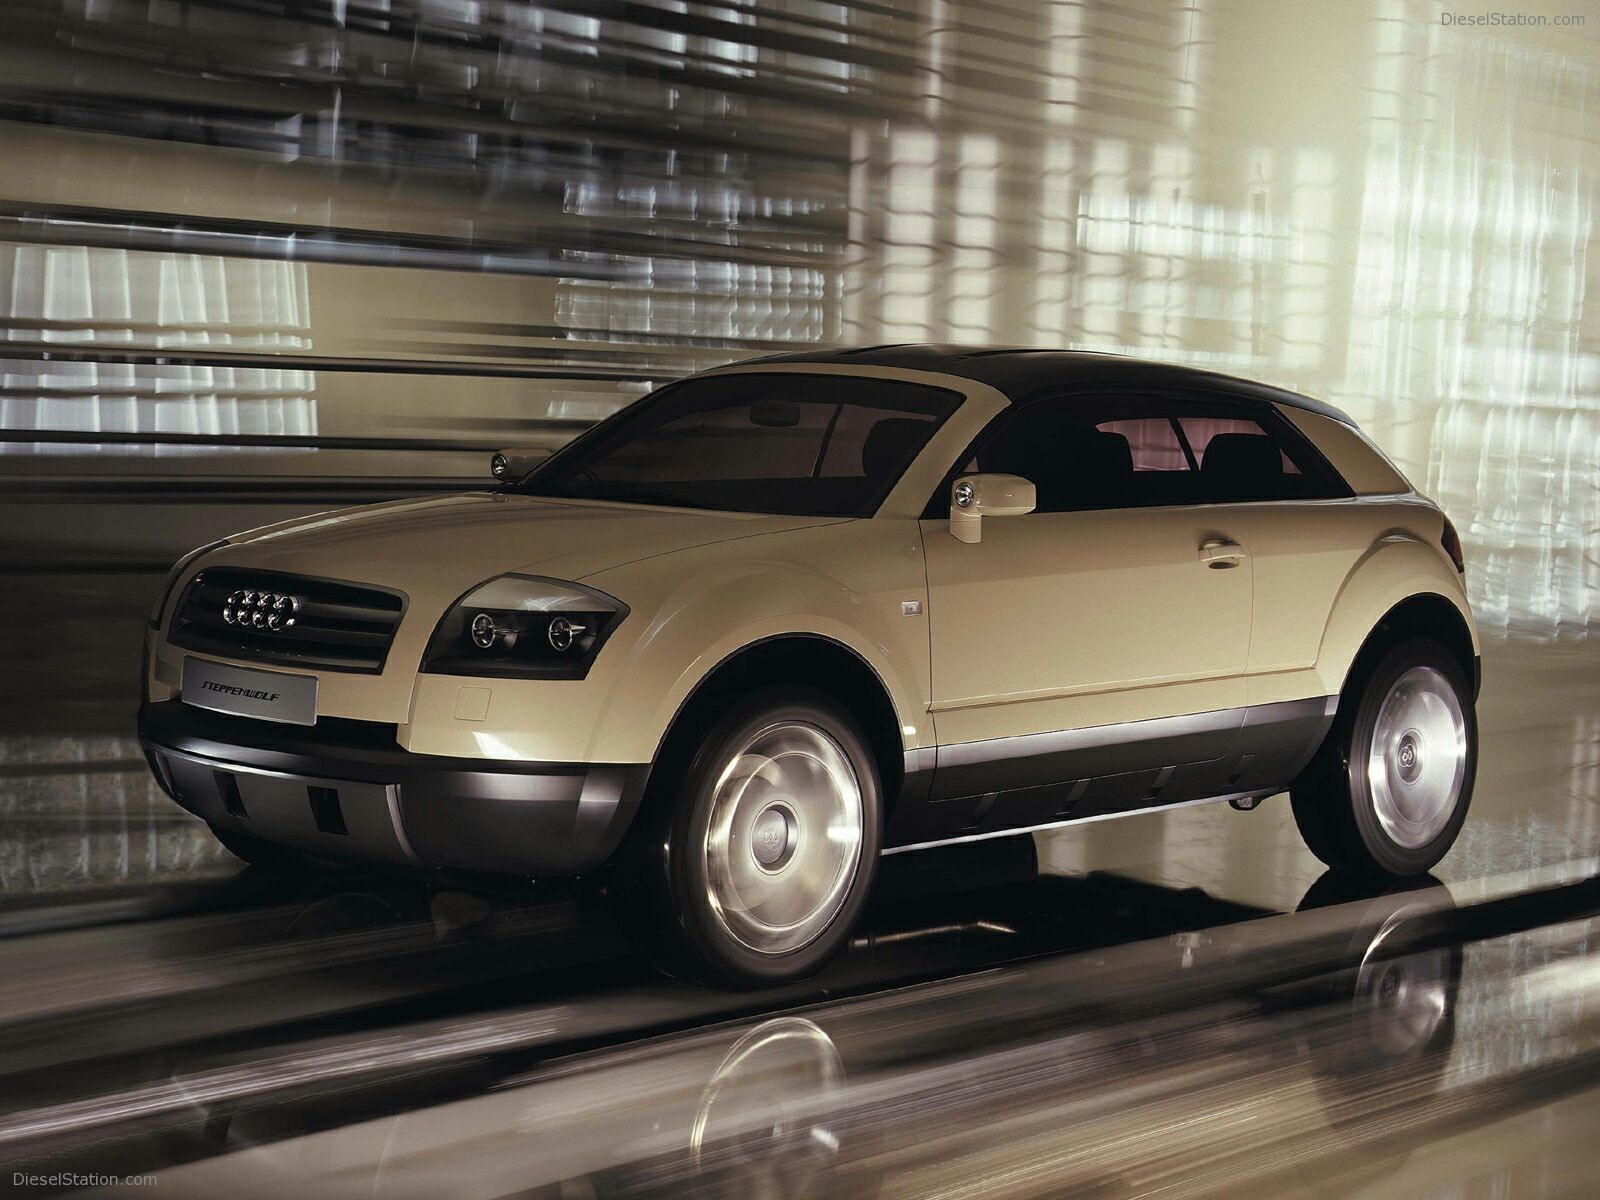 Audi Steppenwolf Exotic Car Image Of Diesel Station